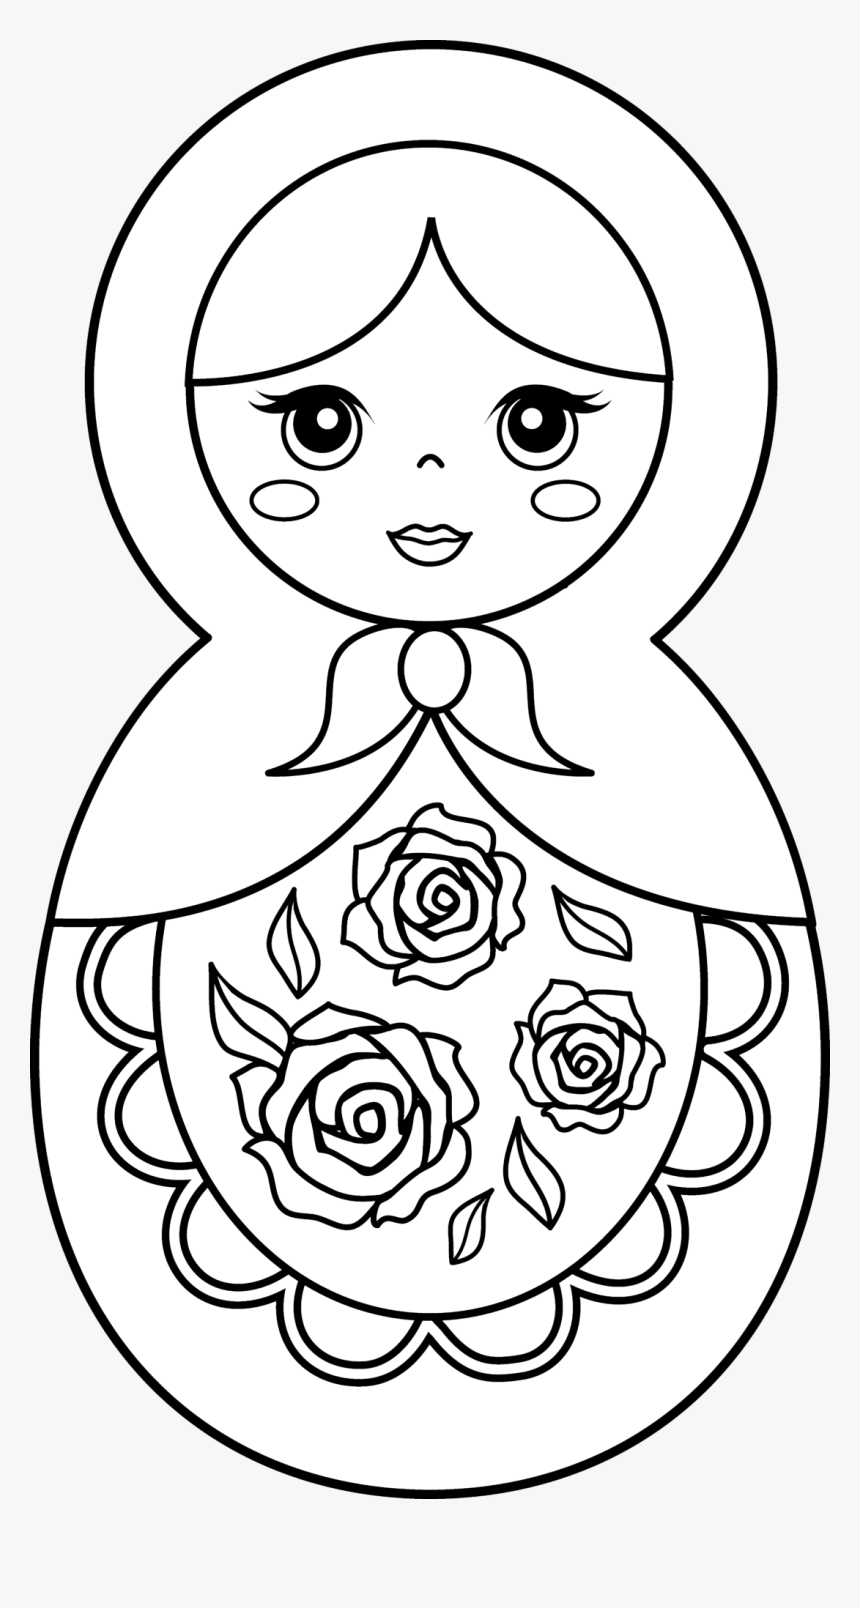 New Coloring Pages Russian Nesting Dolls Coloring Pages Matryoshka